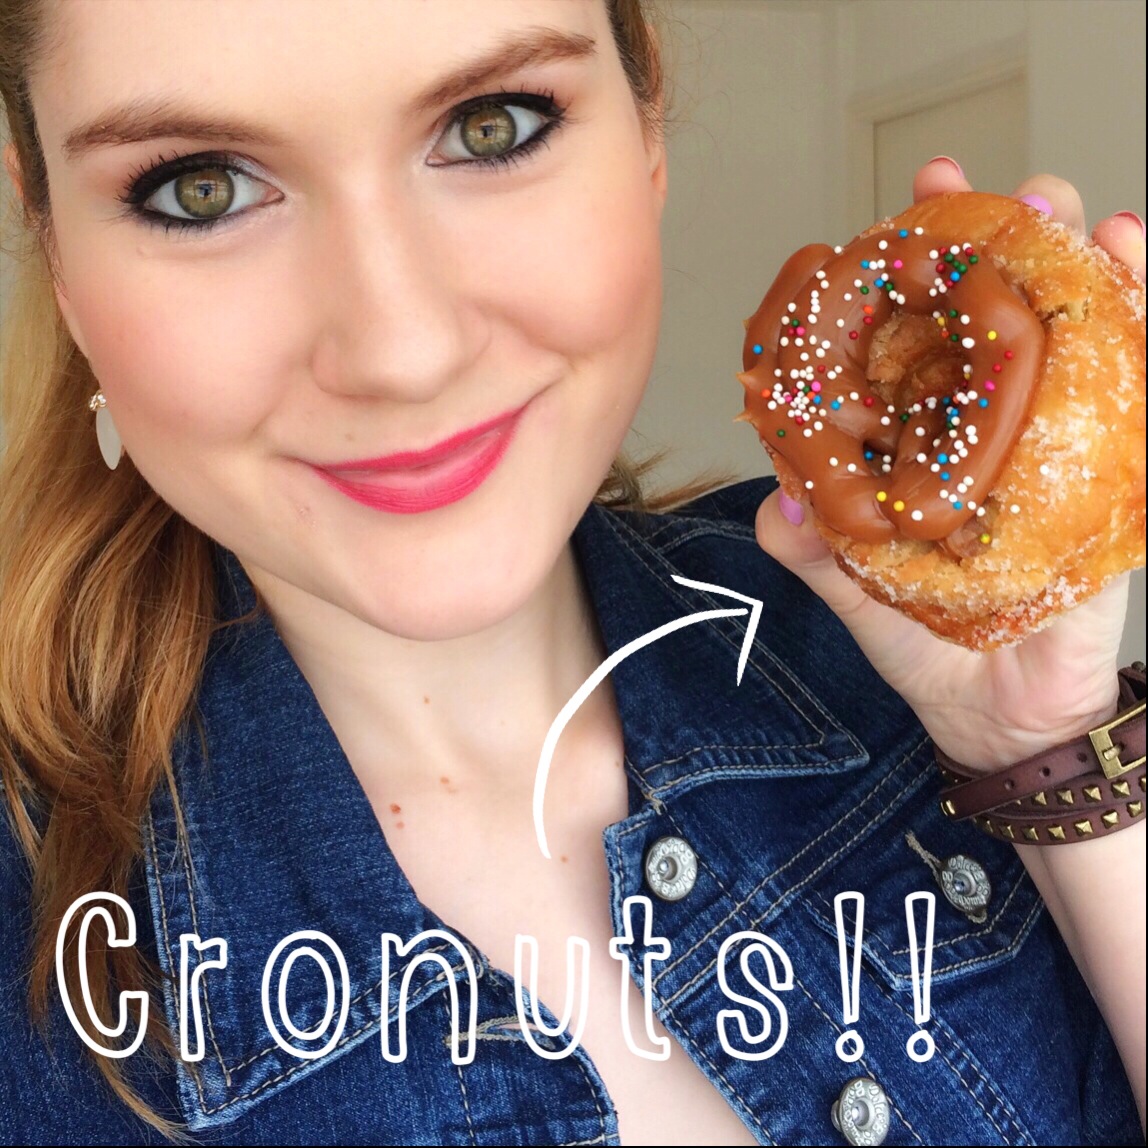 What is a Cronut